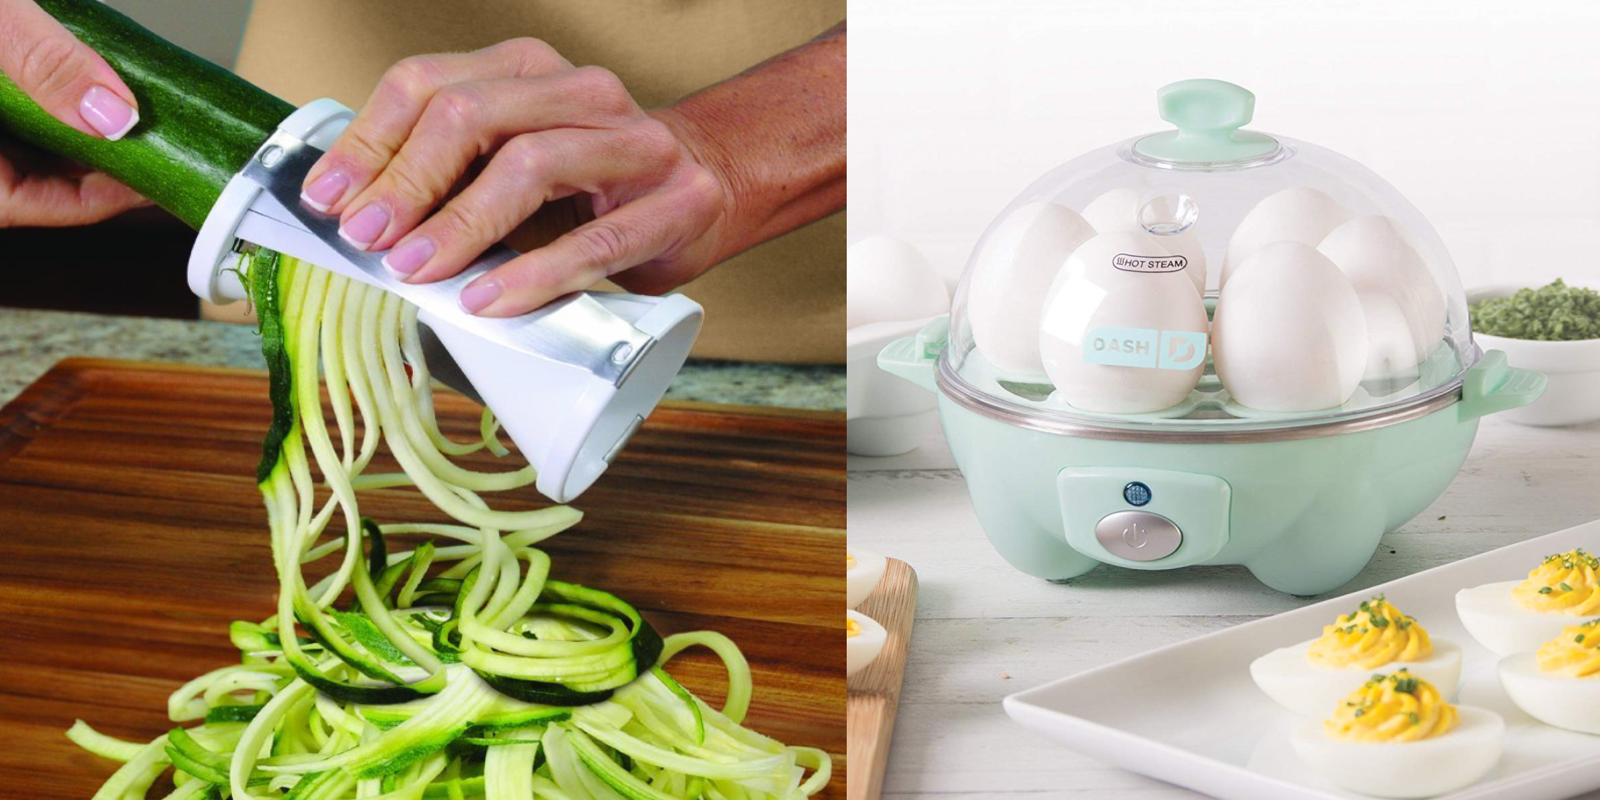 24 kitchen gadgets under 20 you'll actually use Flipboard